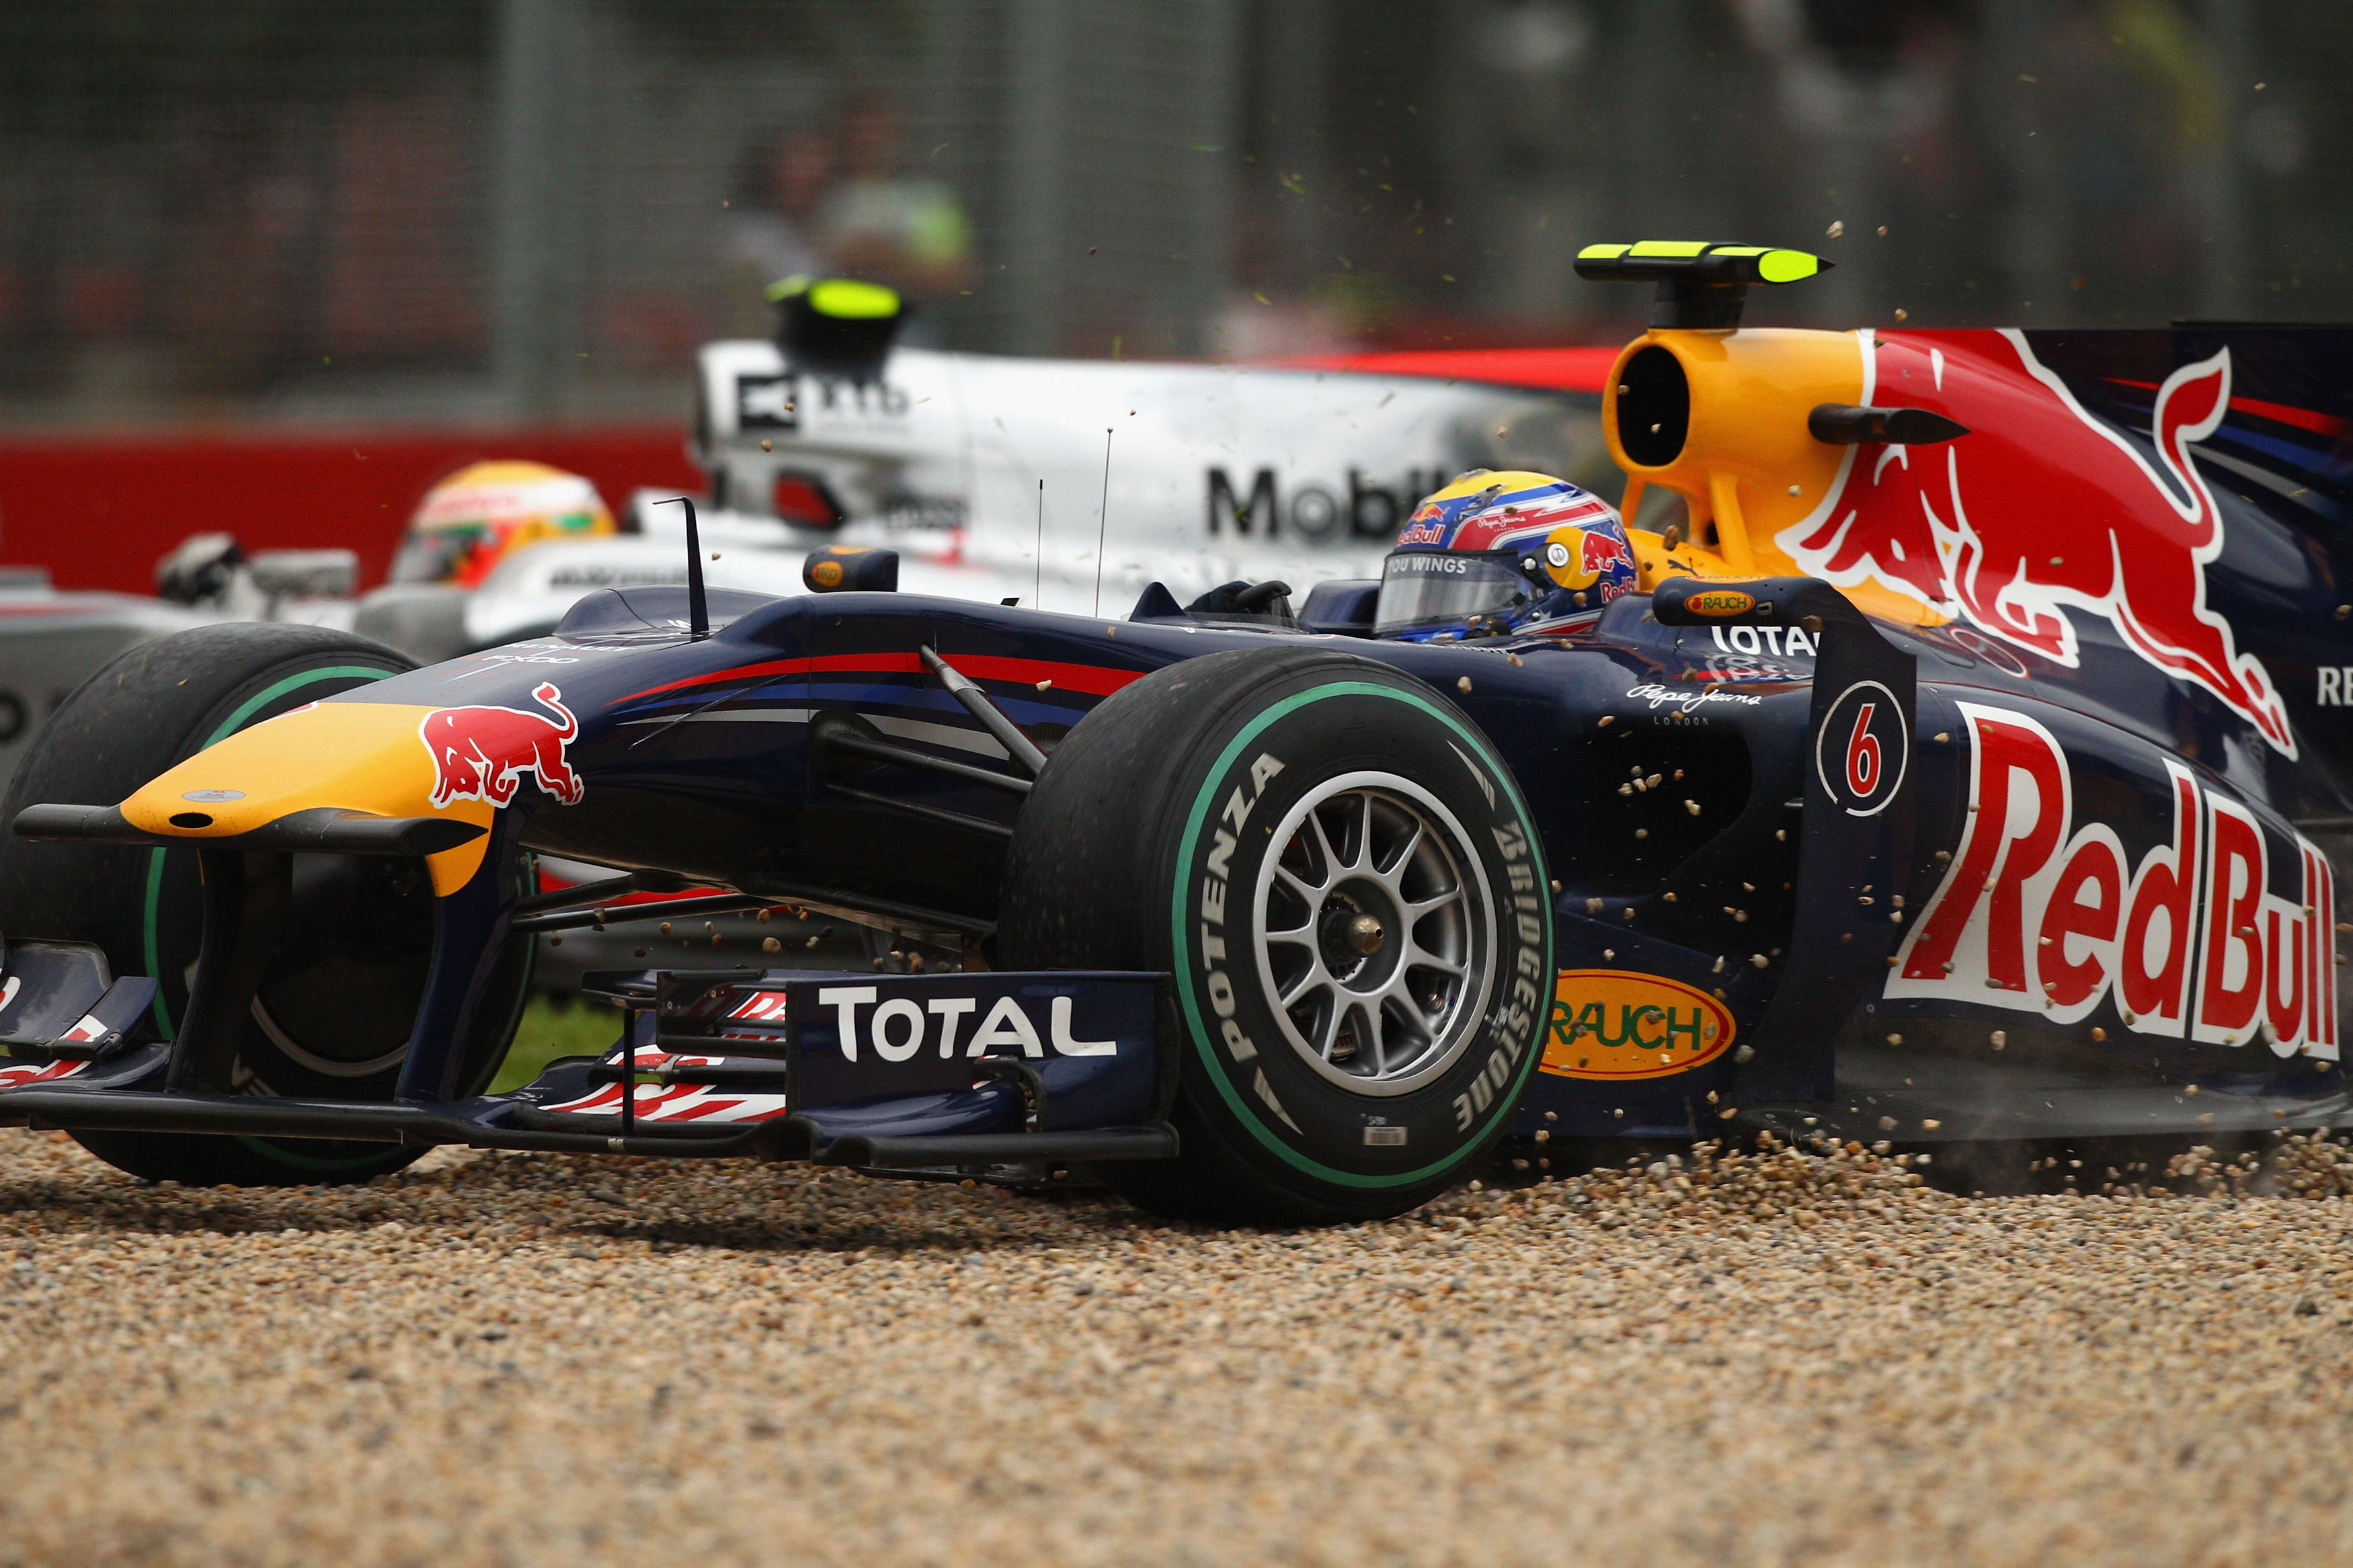 Webber in the gravel after clipping Hamilton